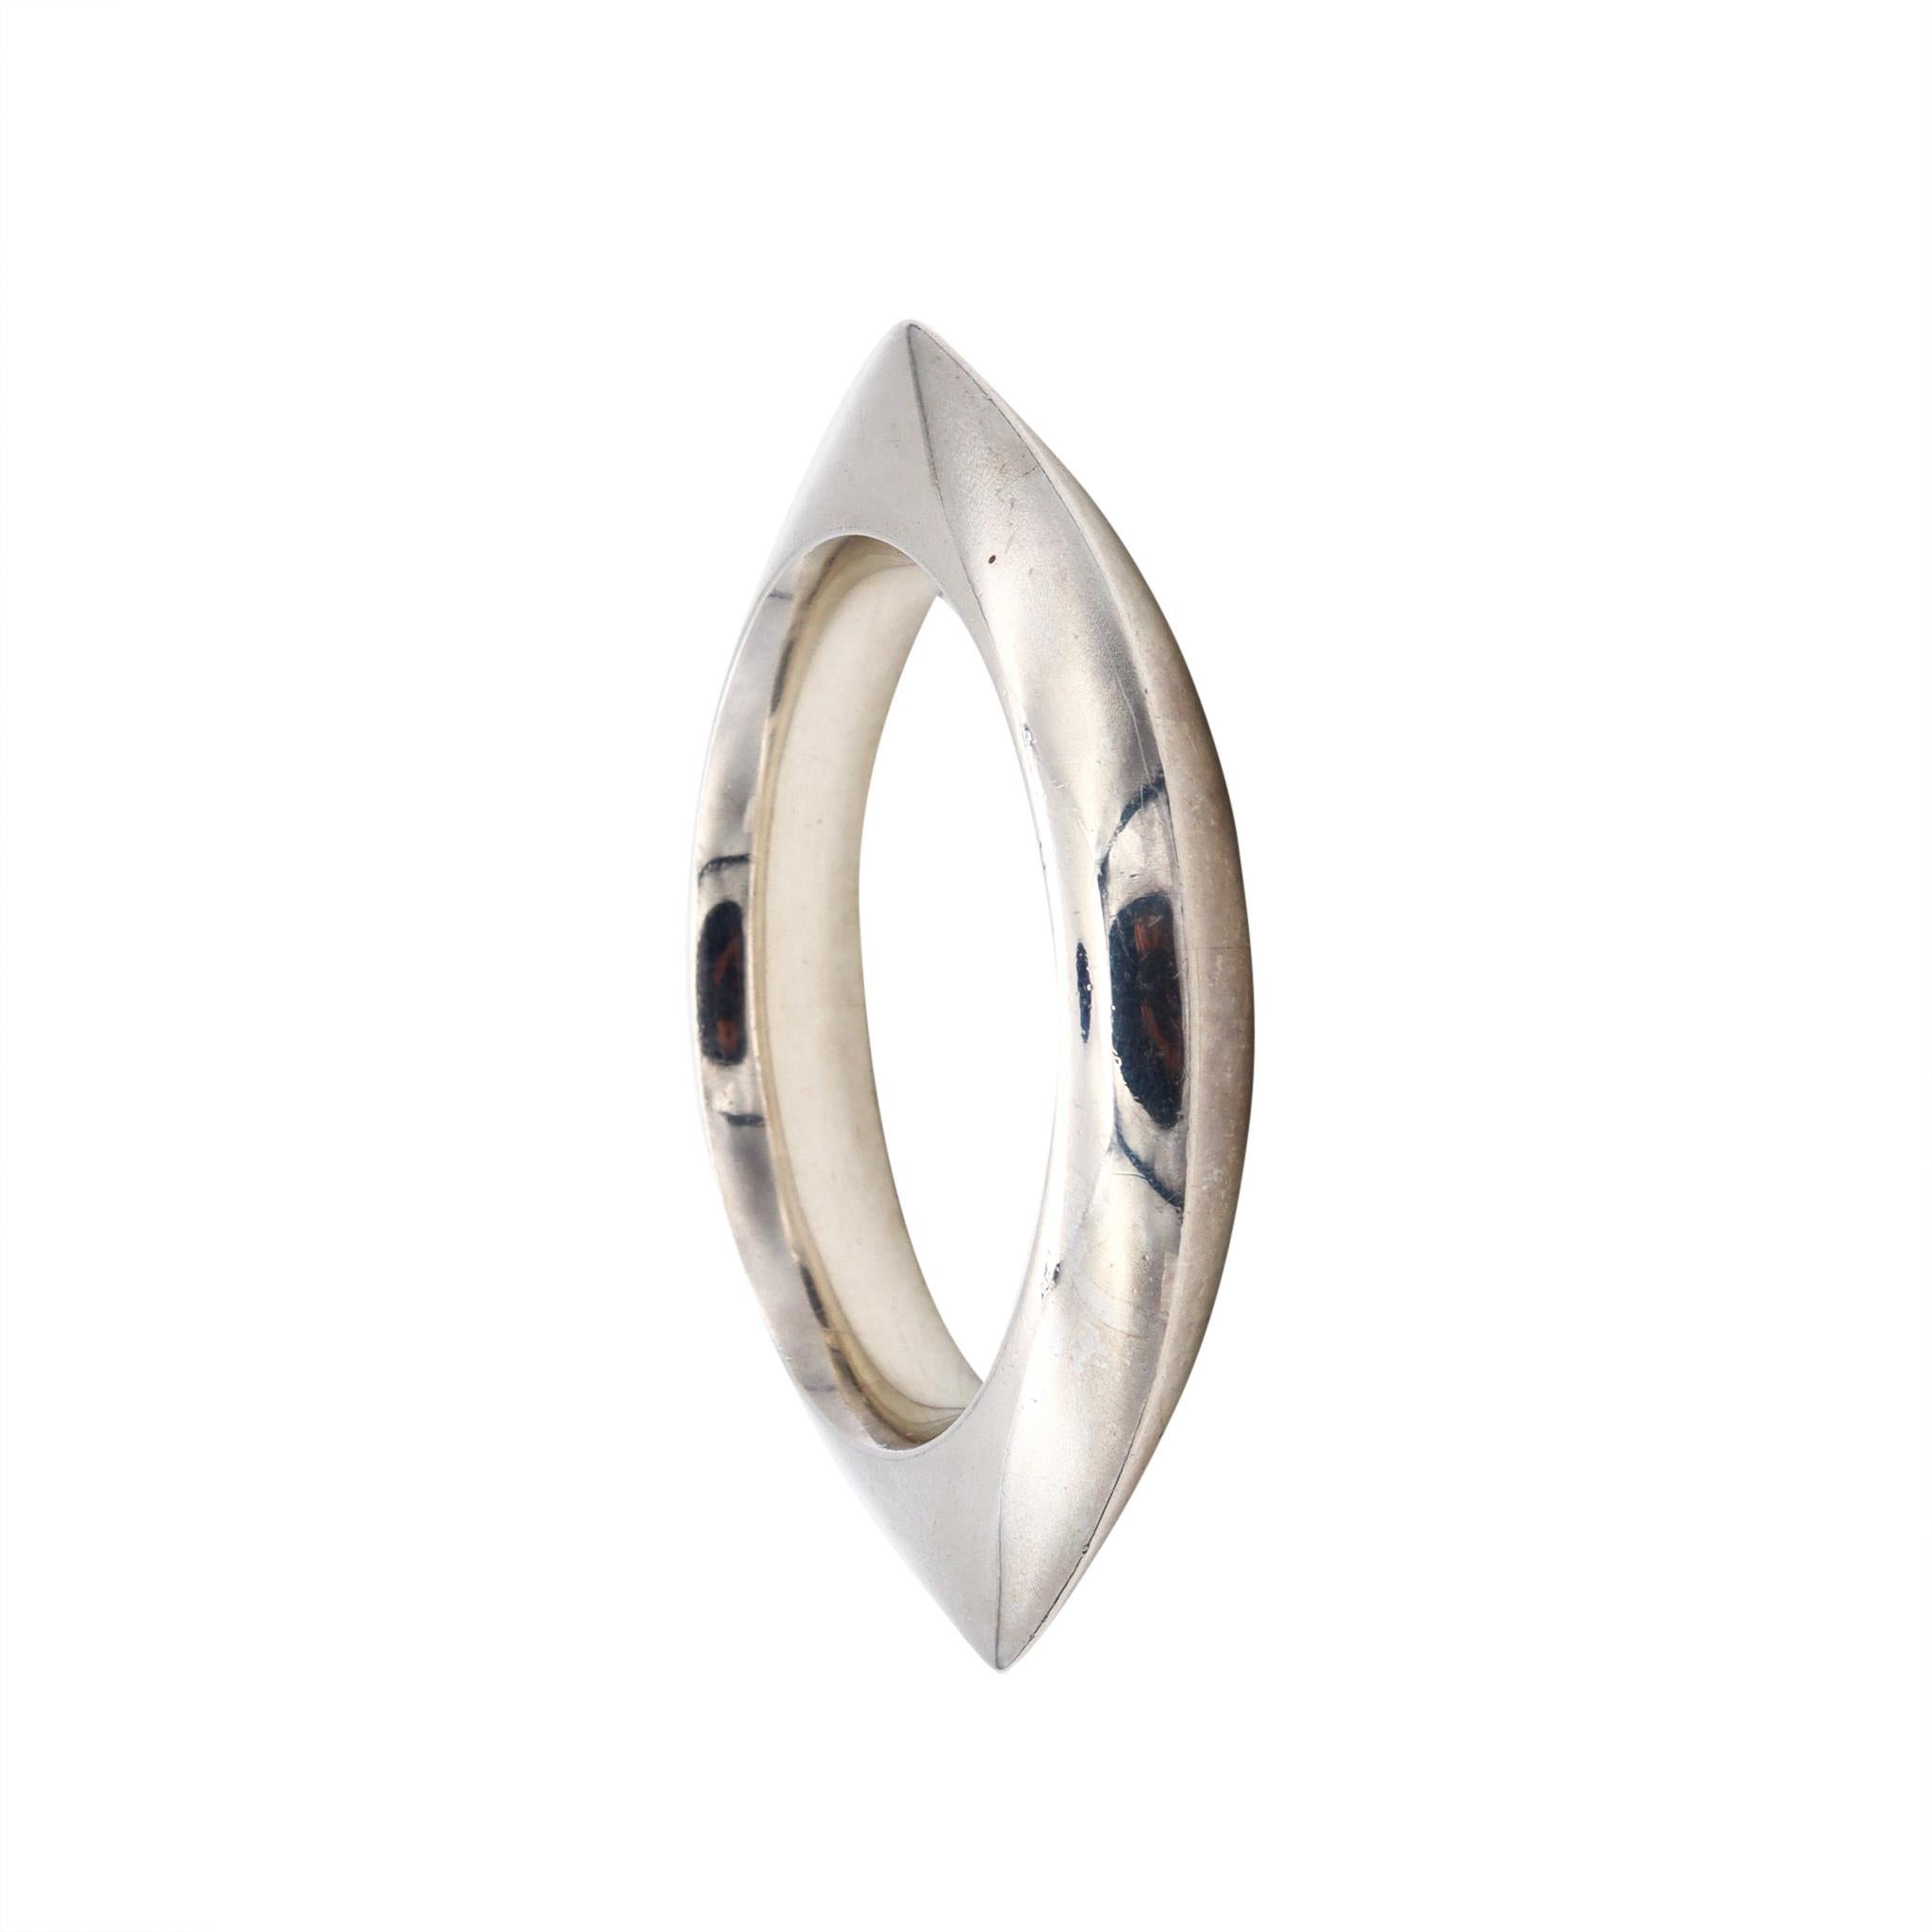 Geometric bangle designed by Nanna Ditzel (1923-2005) for Georg Jensen.

Beautiful vintage aero-dynamic geometric piece, created in Copenhagen Denmark, circa1960. This rare bangles was designed in the form of an abstract eye by Ditzel as the model